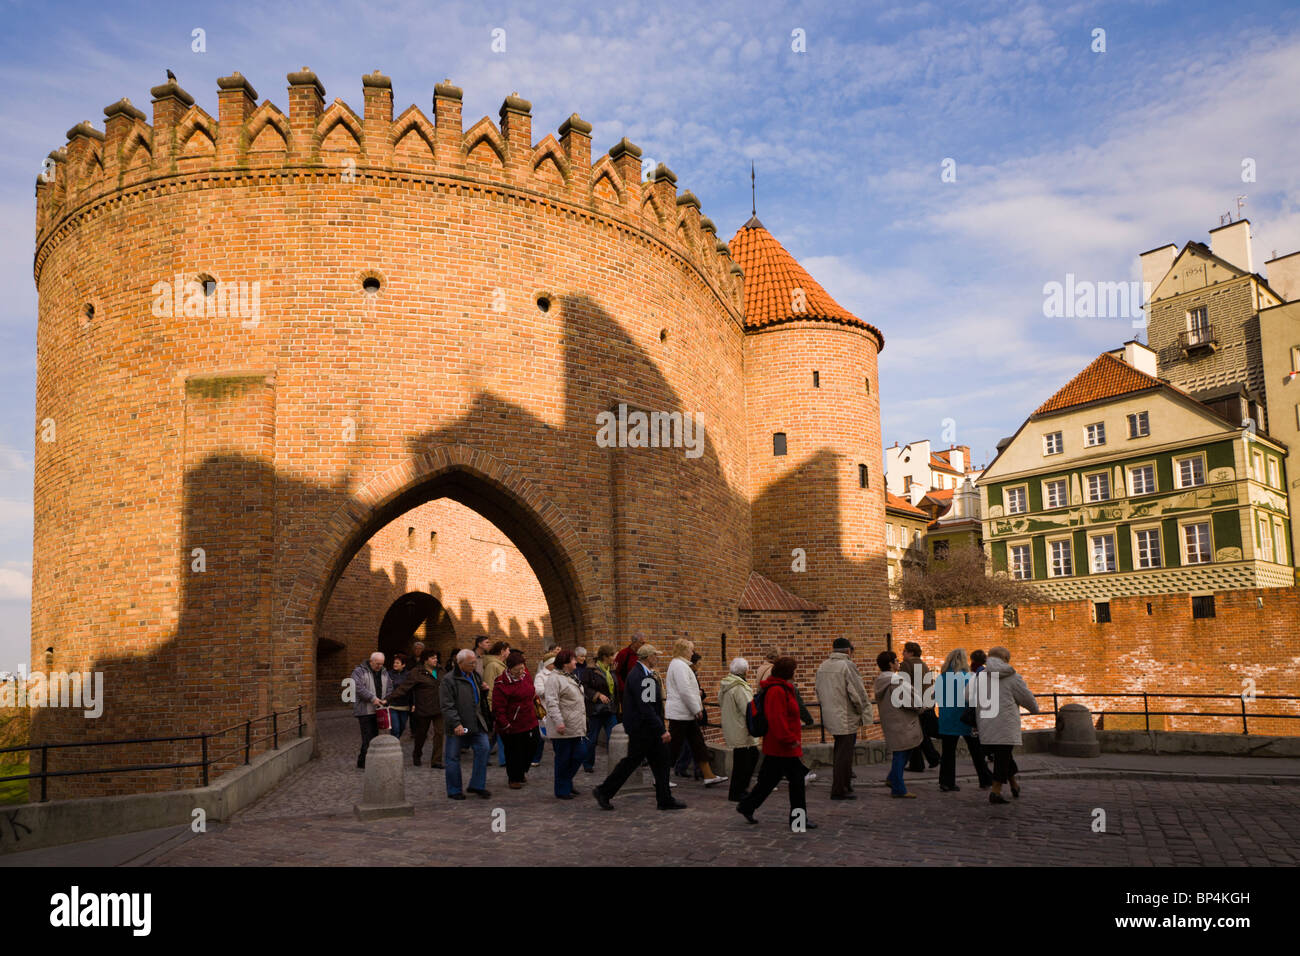 The Warsaw Barbican. Old Town, Warsaw Poland. Stock Photo